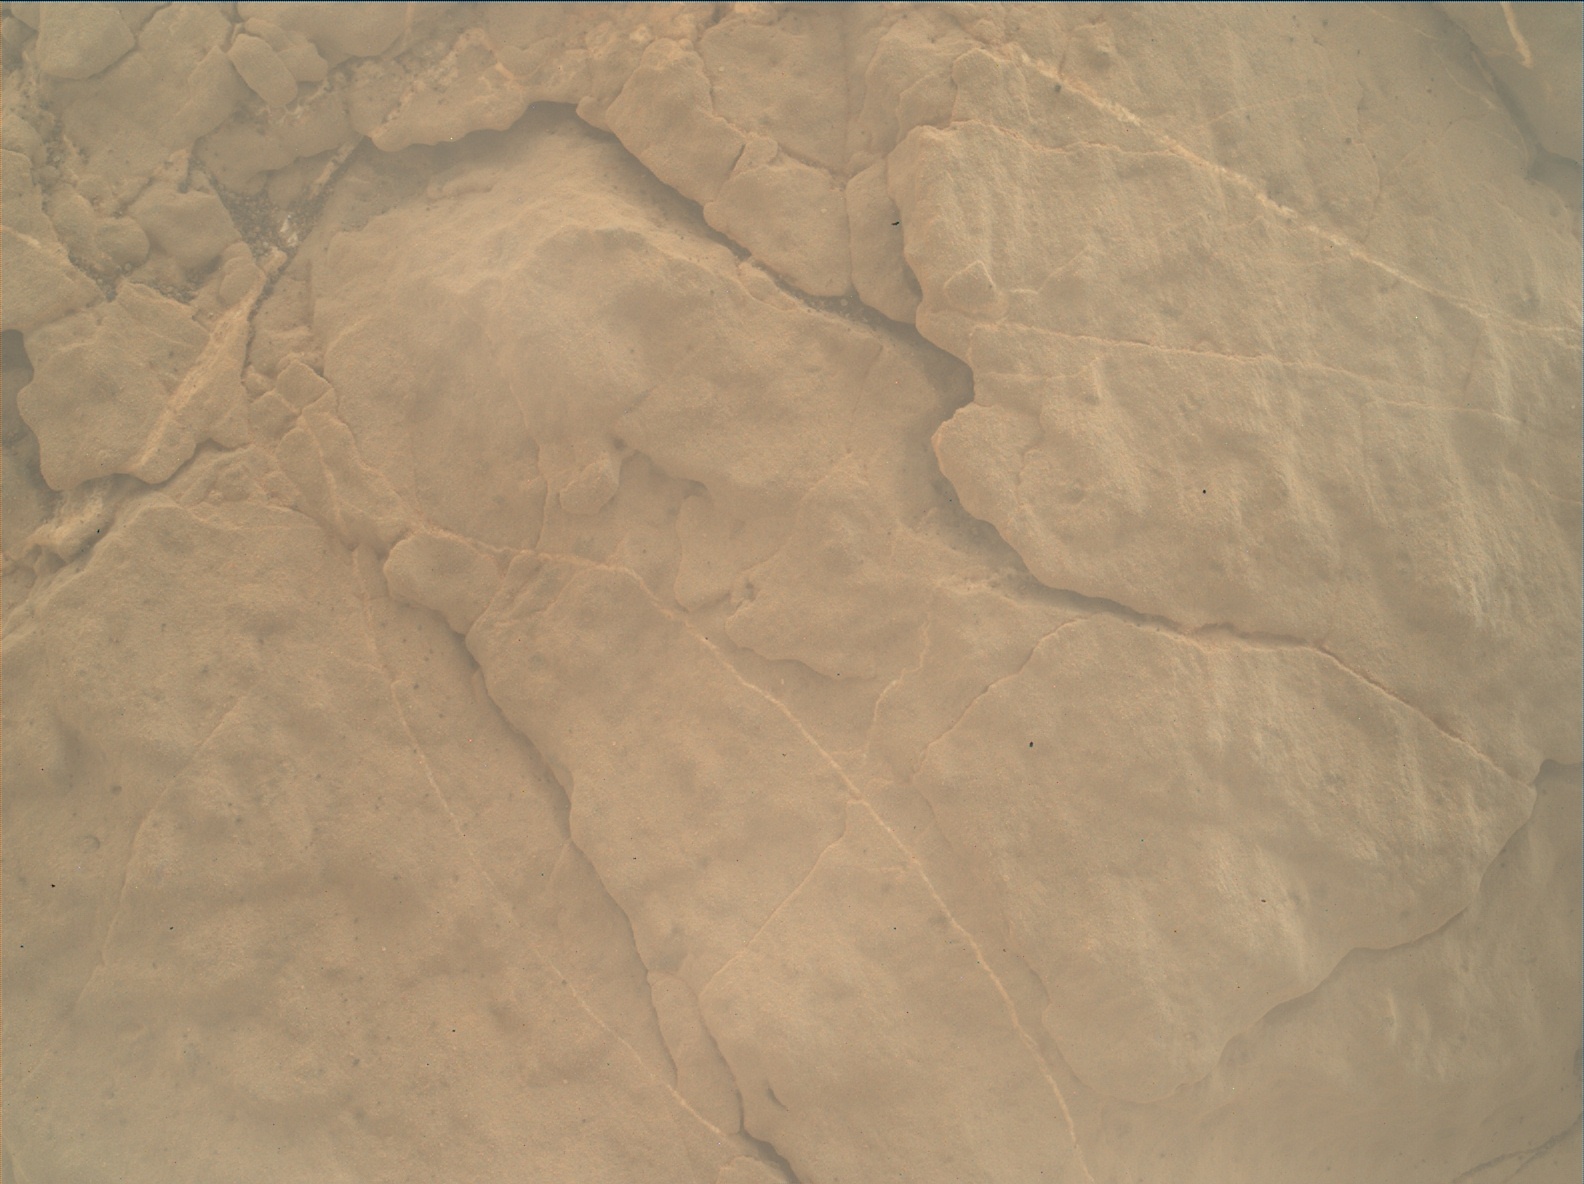 Nasa's Mars rover Curiosity acquired this image using its Mars Hand Lens Imager (MAHLI) on Sol 2654